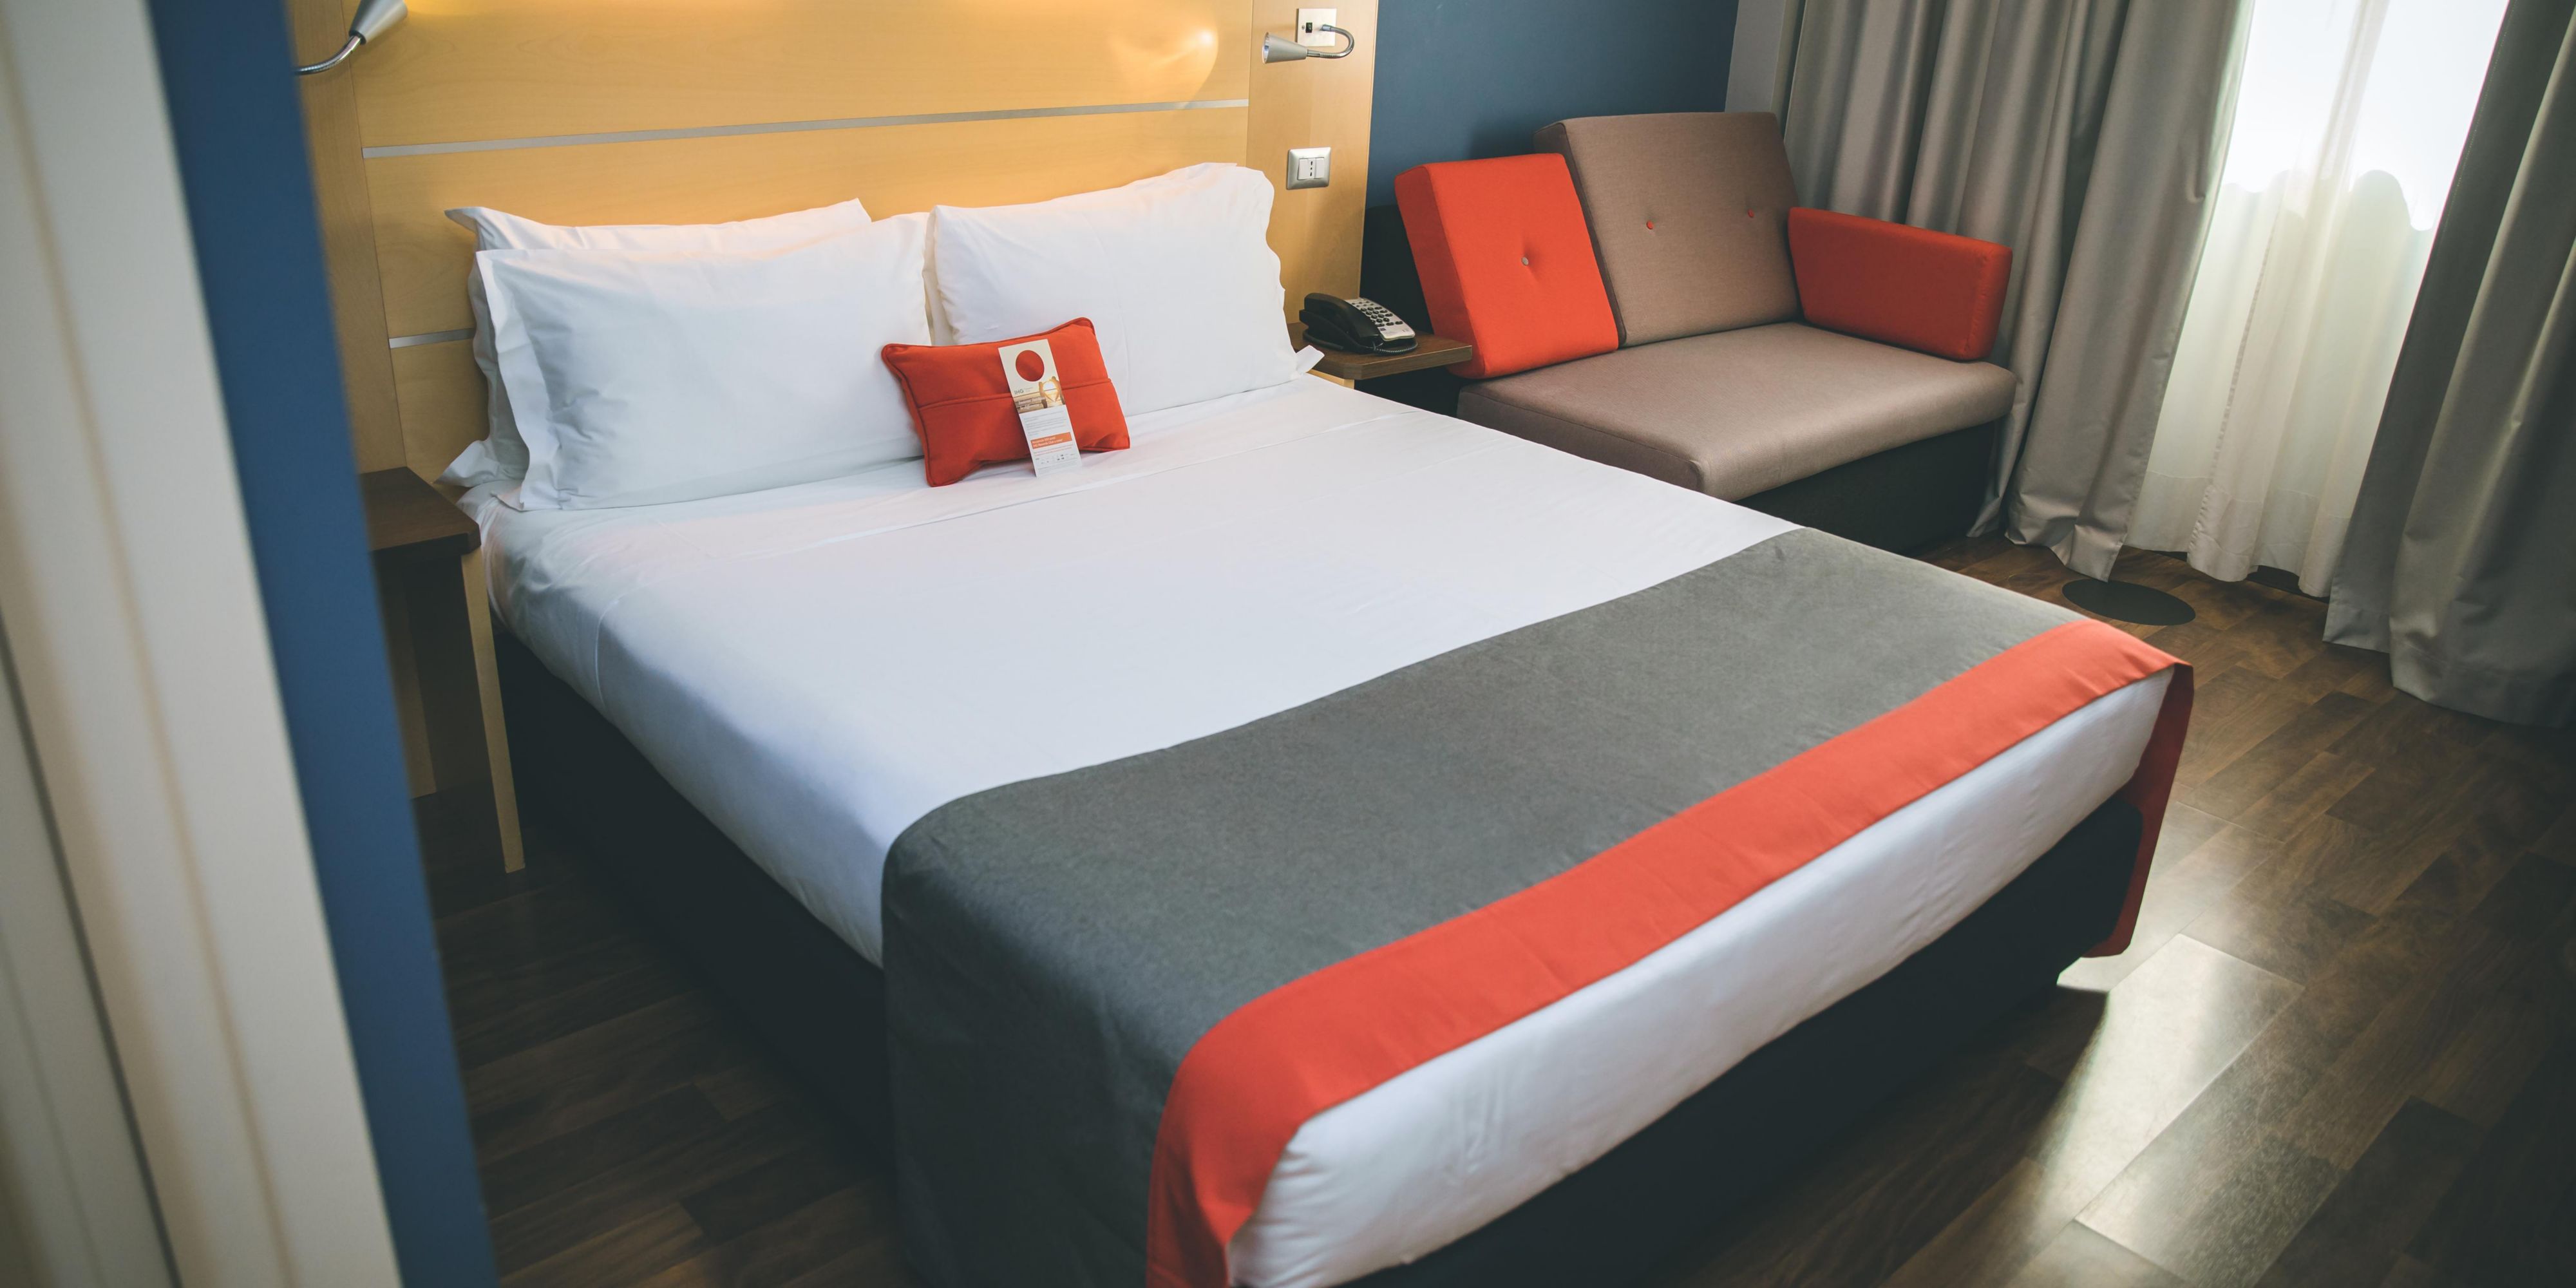 Triple rooms and connecting rooms available to accommodate up to 5 persons.